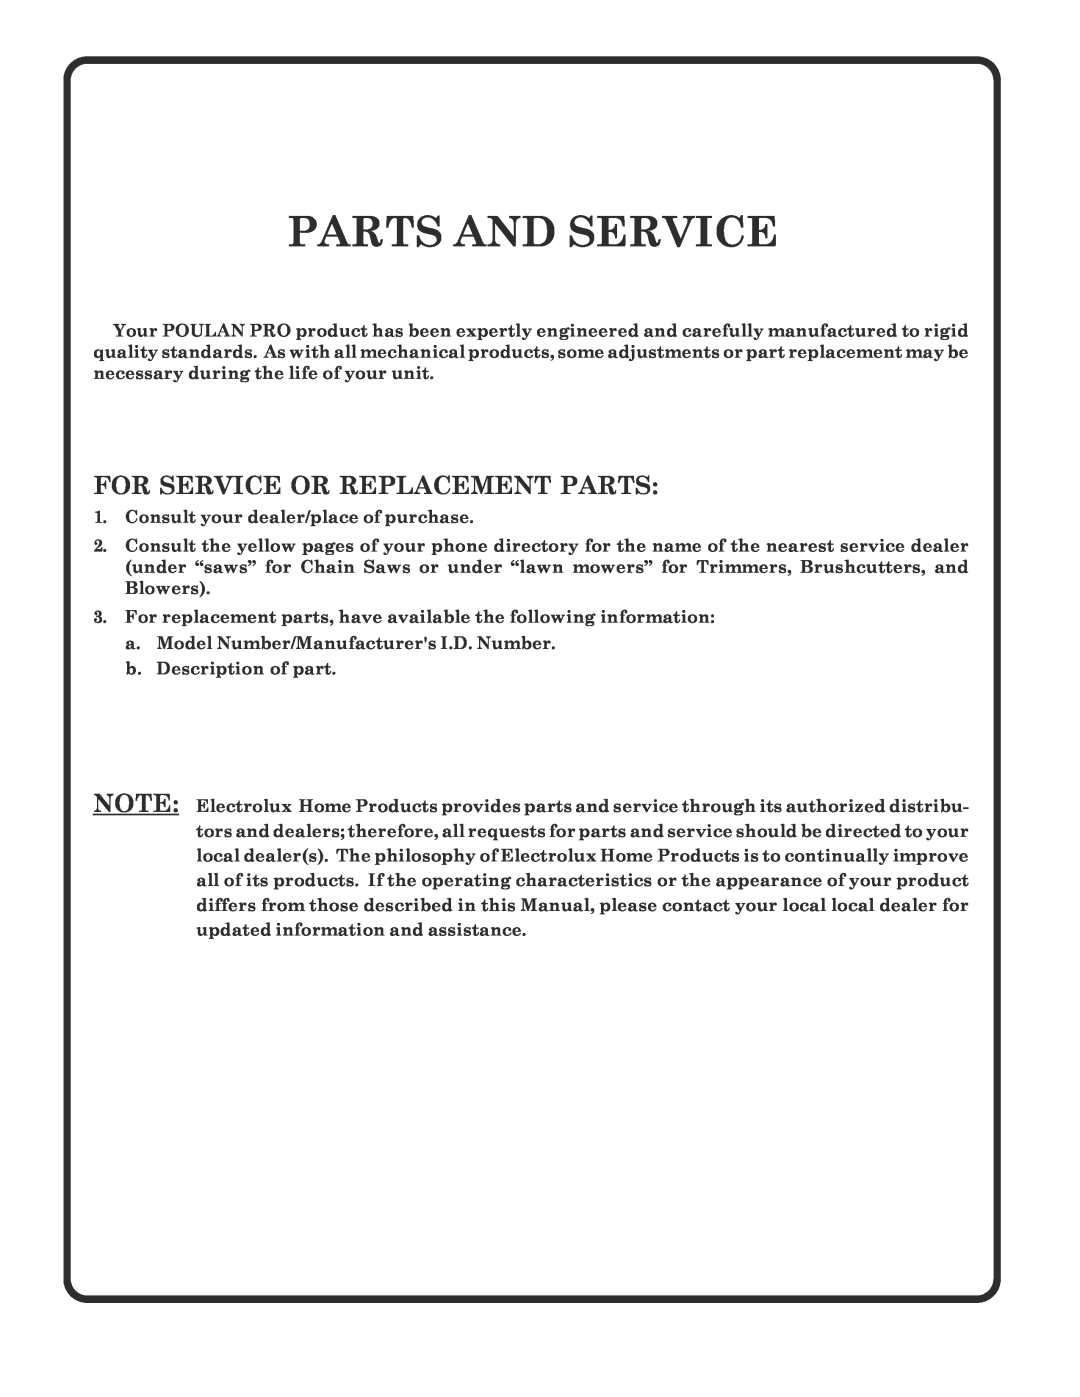 Poulan 180278 owner manual Parts And Service, For Service Or Replacement Parts 